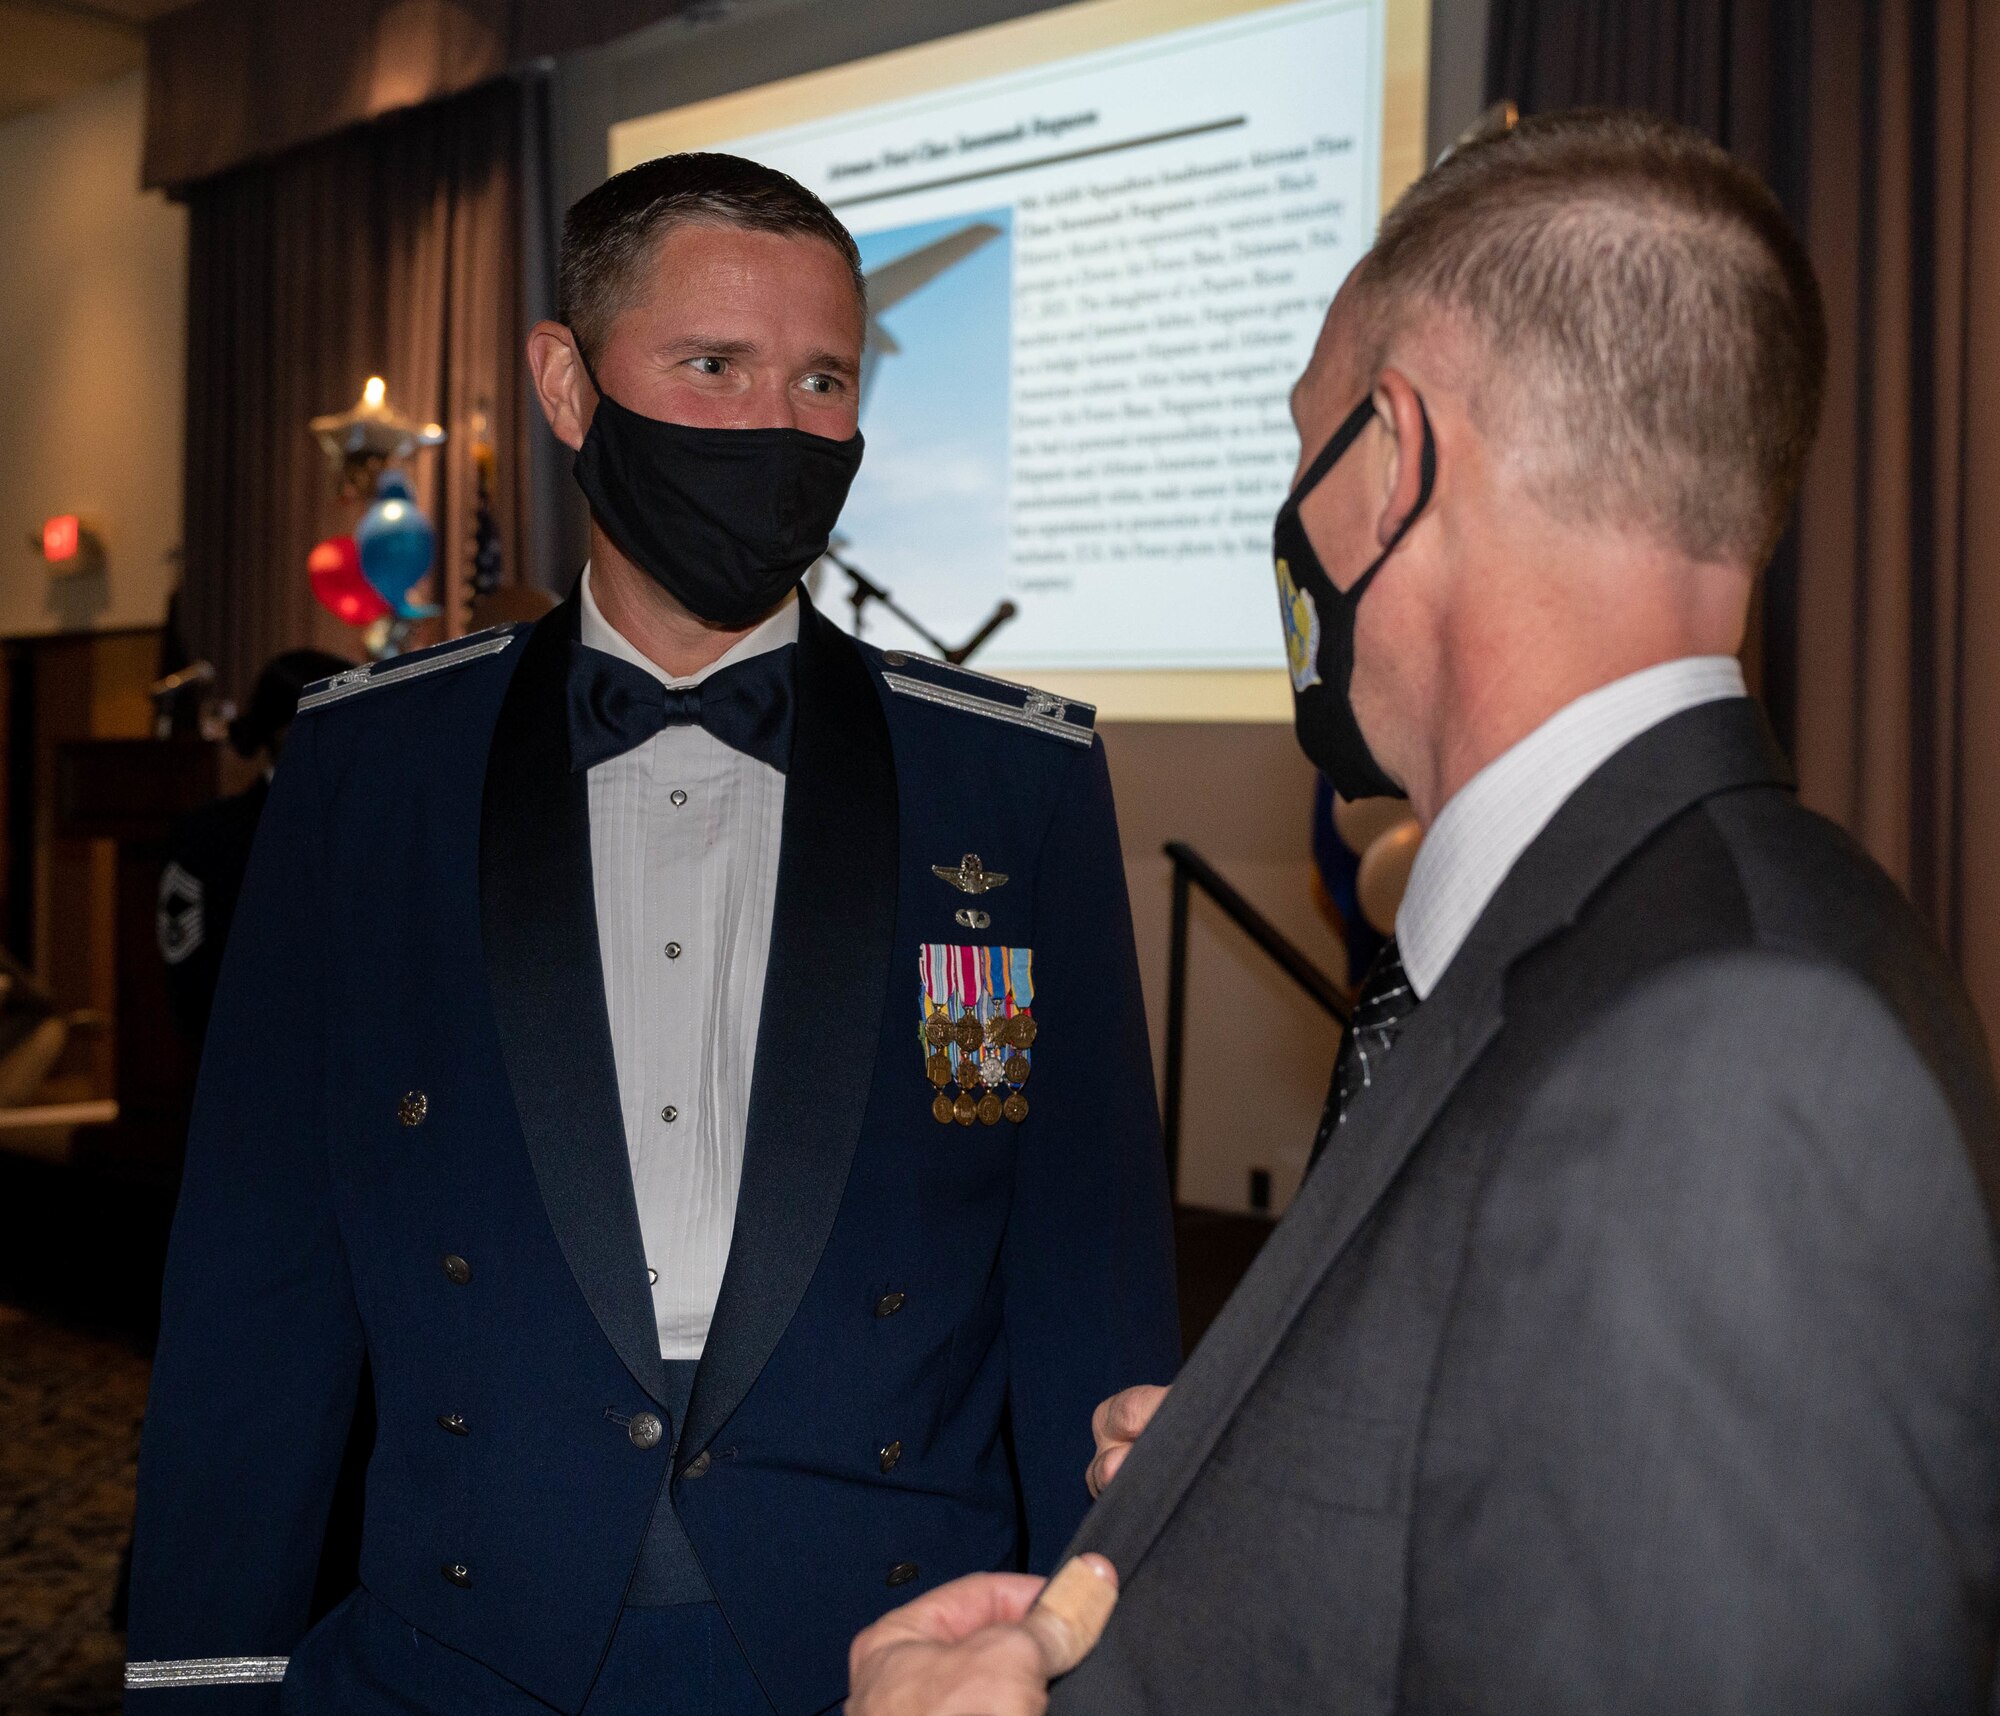 Col. Shanon Anderson, 436th Airlift Wing vice commander, speaks with Craig Lindstrom, 436th AW director of staff, during the 2021 Air Force Ball at Dover Air Force Base, Delaware, Sept. 18, 2021. The Air Force Ball is an annual event held to celebrate the Air Force’s birthday. (U.S. Air Force photo by Senior Airman Faith Schaefer)